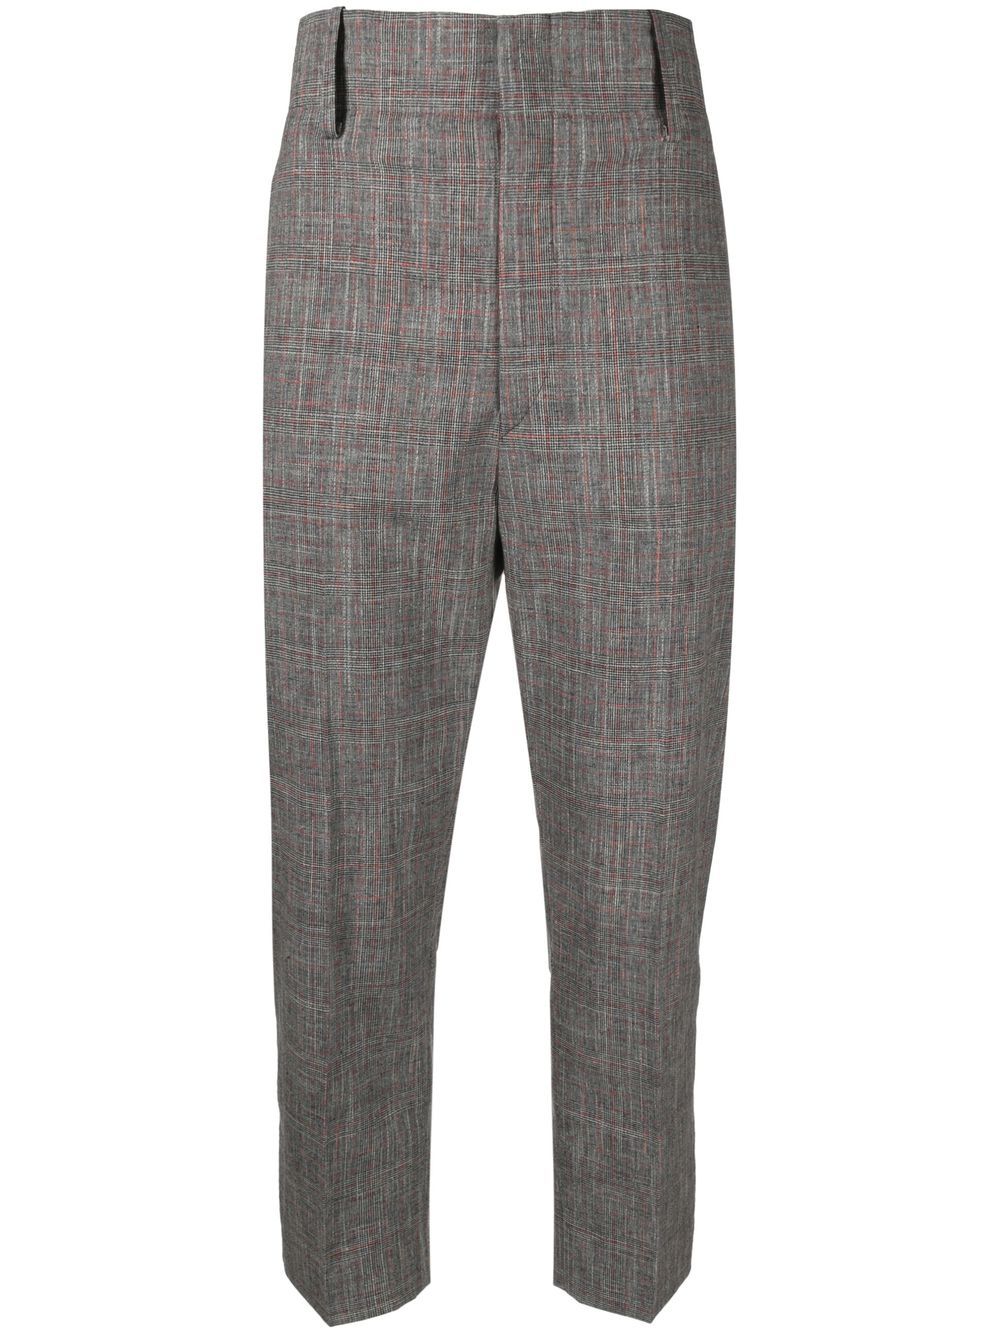 Isabel Marant Étoile Checked Tapered Trousers In Bkpk Black Pink